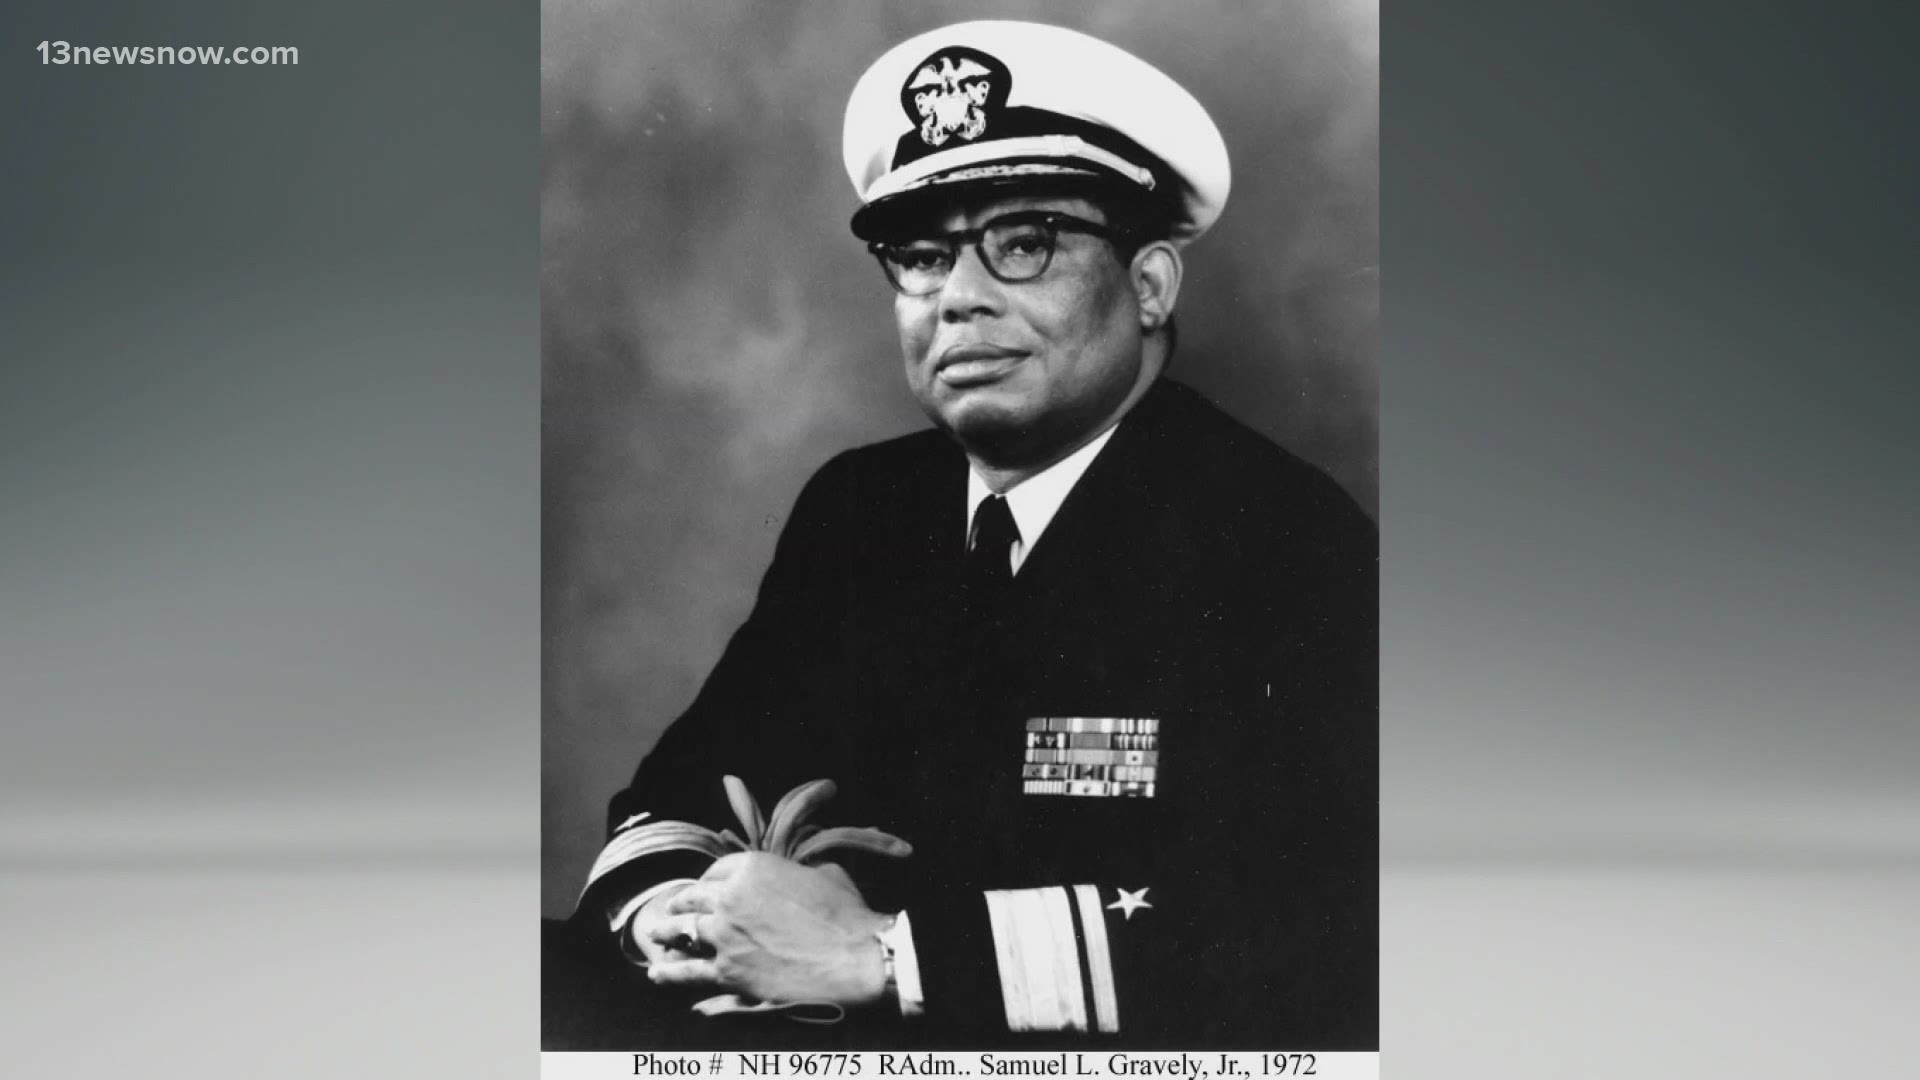 Commander Samuel L. Gravely, Jr., became the U.S. Navy's first African American Admiral. The USS Gravely ship was named after him.